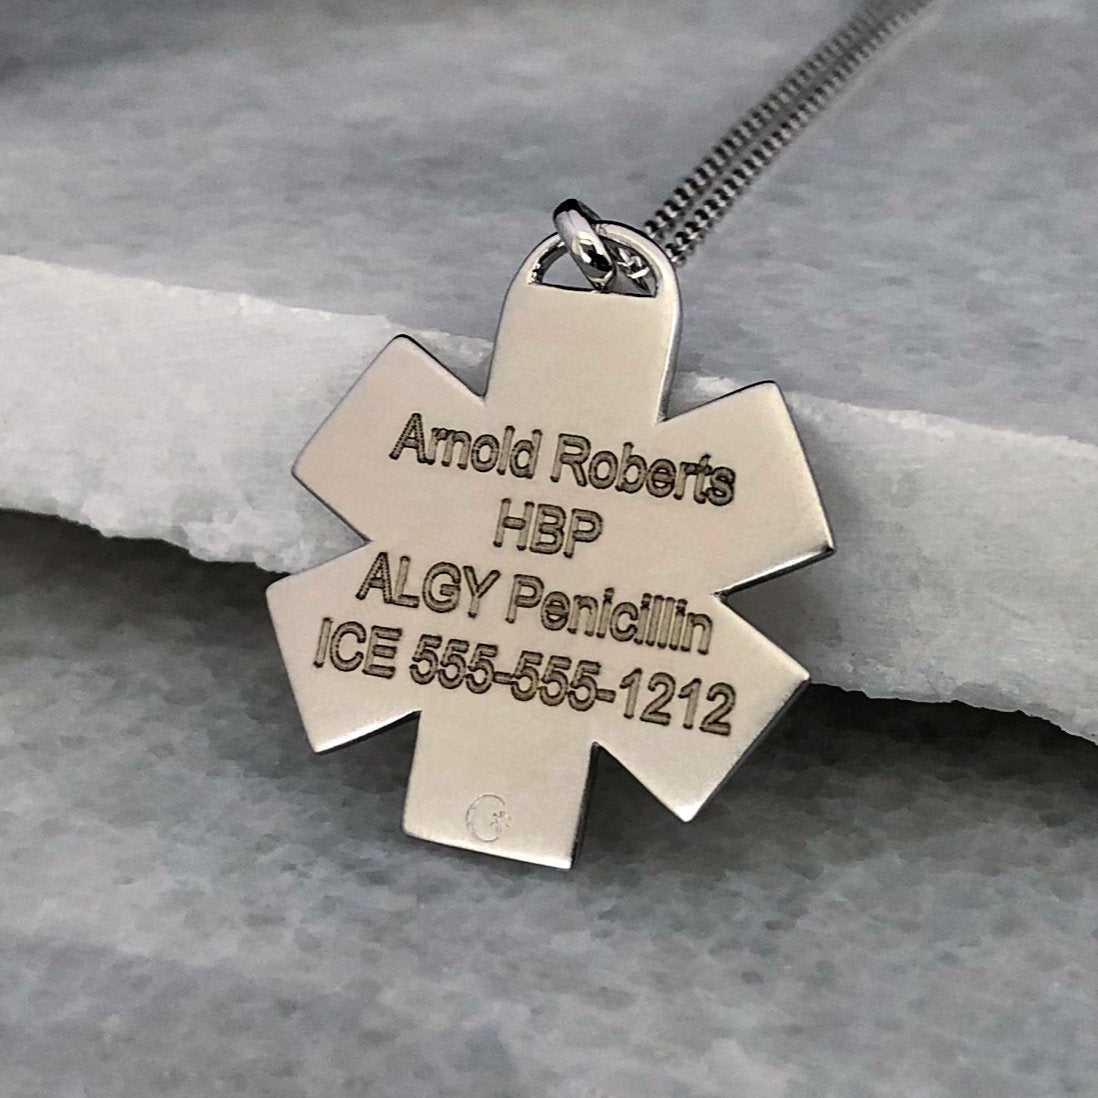 Amazon.com : Medical Alert Tag - Allergic to Bees - Pack Zipper Pull Charms/ Anaphylaxis/Emergency Tag/Medical Warning : Office Products